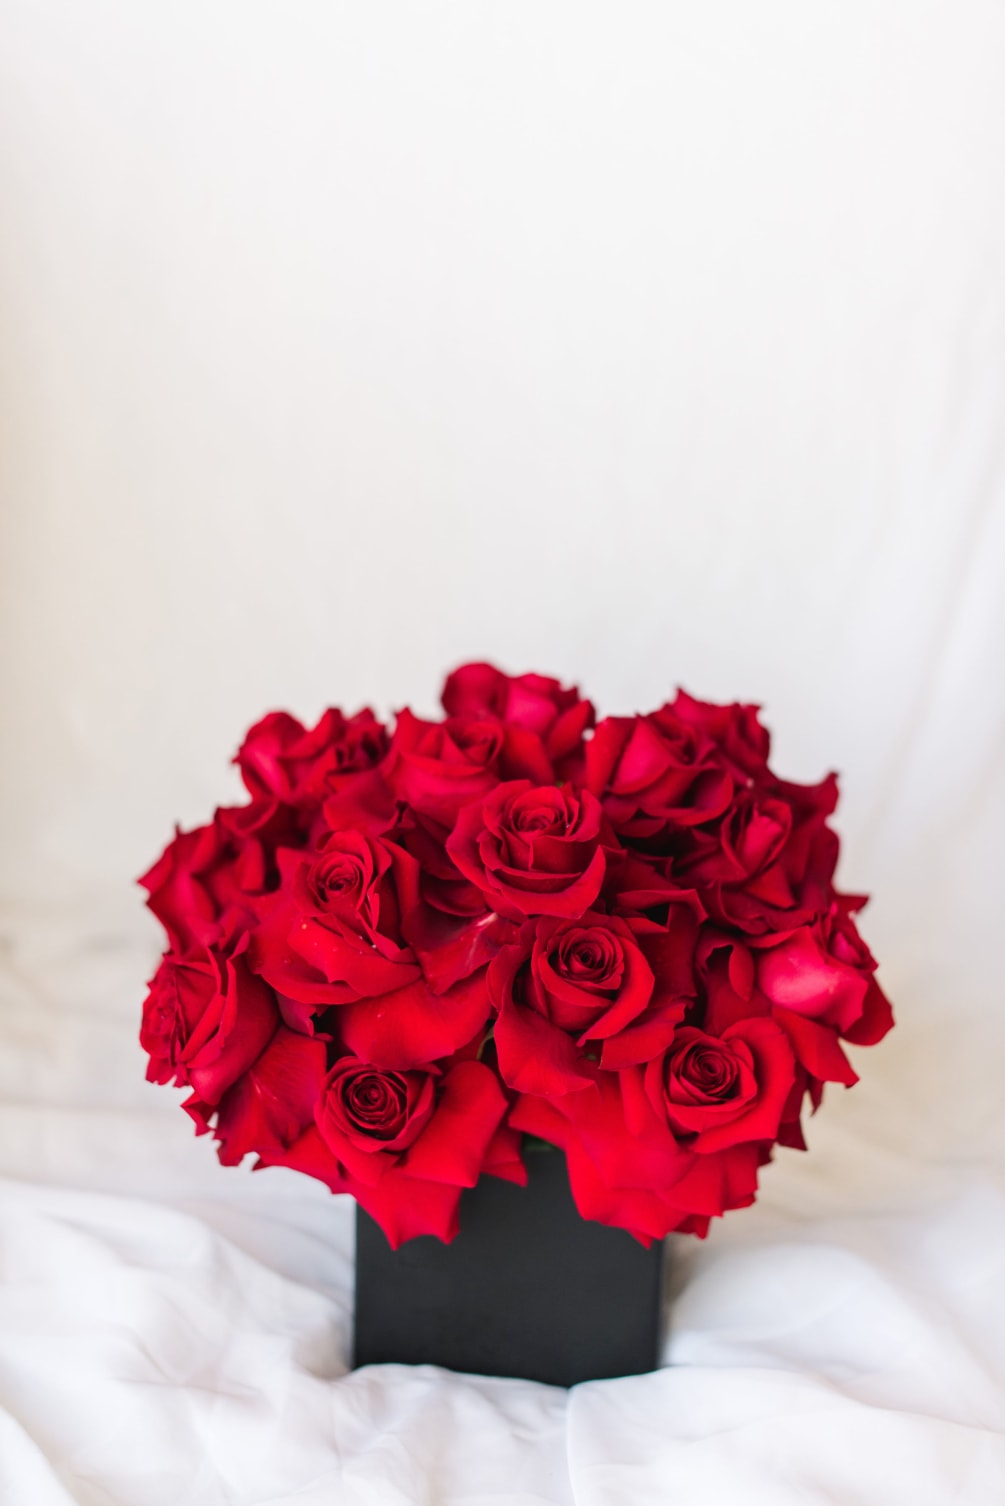 Simple and classic all red rose arrangement in a black cube vase.